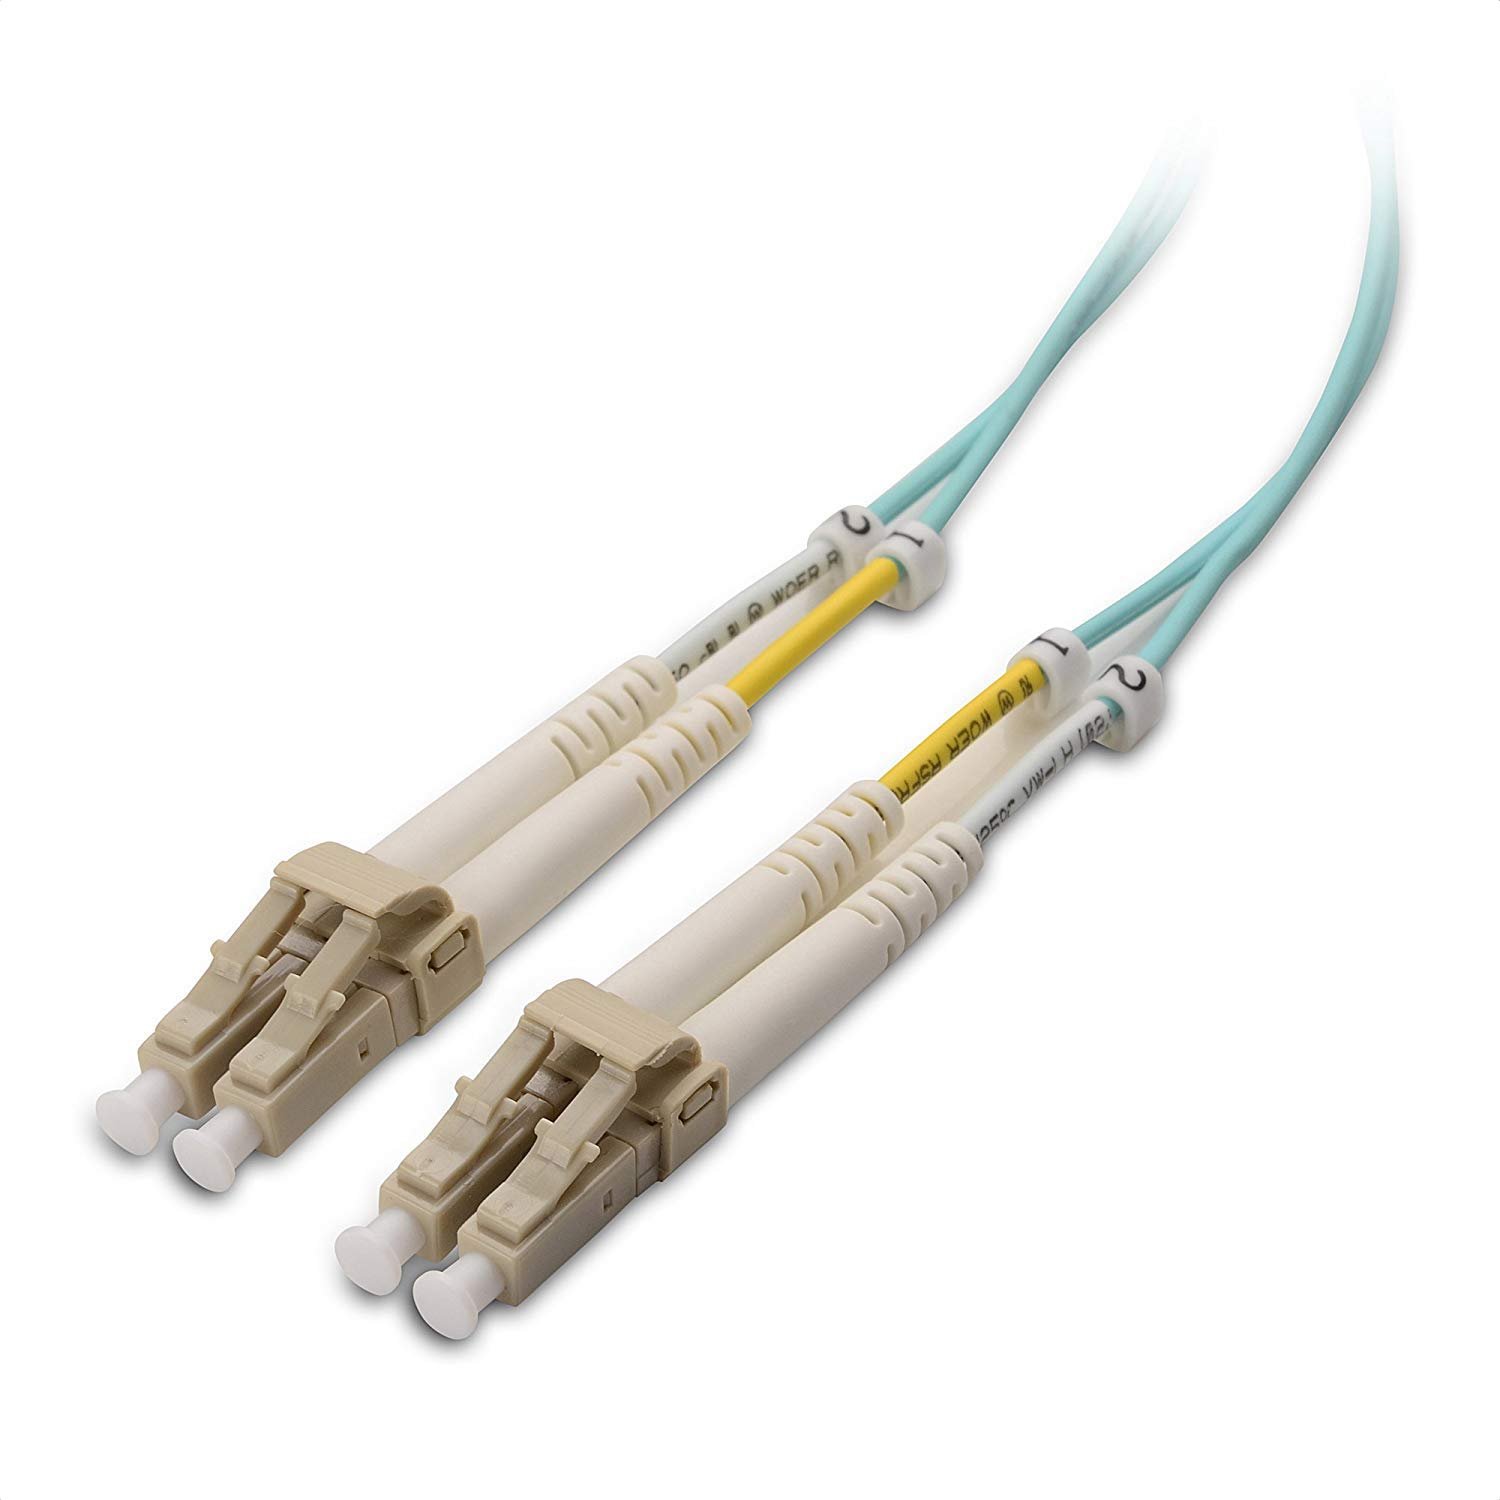 Book Cover Cable Matters OFNP Plenum Multimode Duplex OM3 Fiber Cable 9.8 Feet / 3m (40Gb 10Gb, LC to LC, 50/125 Fiber Optic Cable, Fiber Patch Cable) 9.8 ft